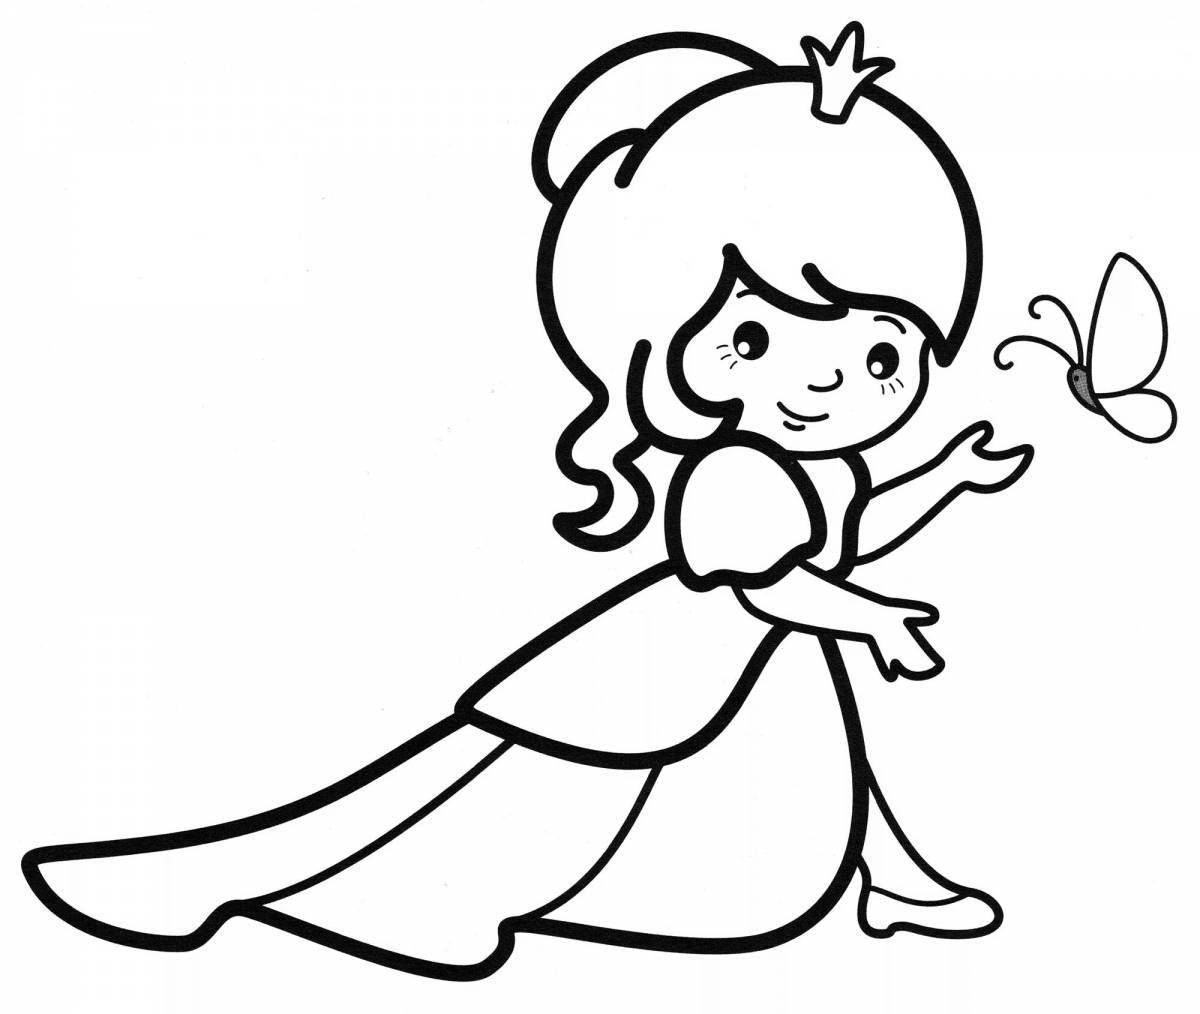 Gorgeous princess coloring pages for girls 4 years old